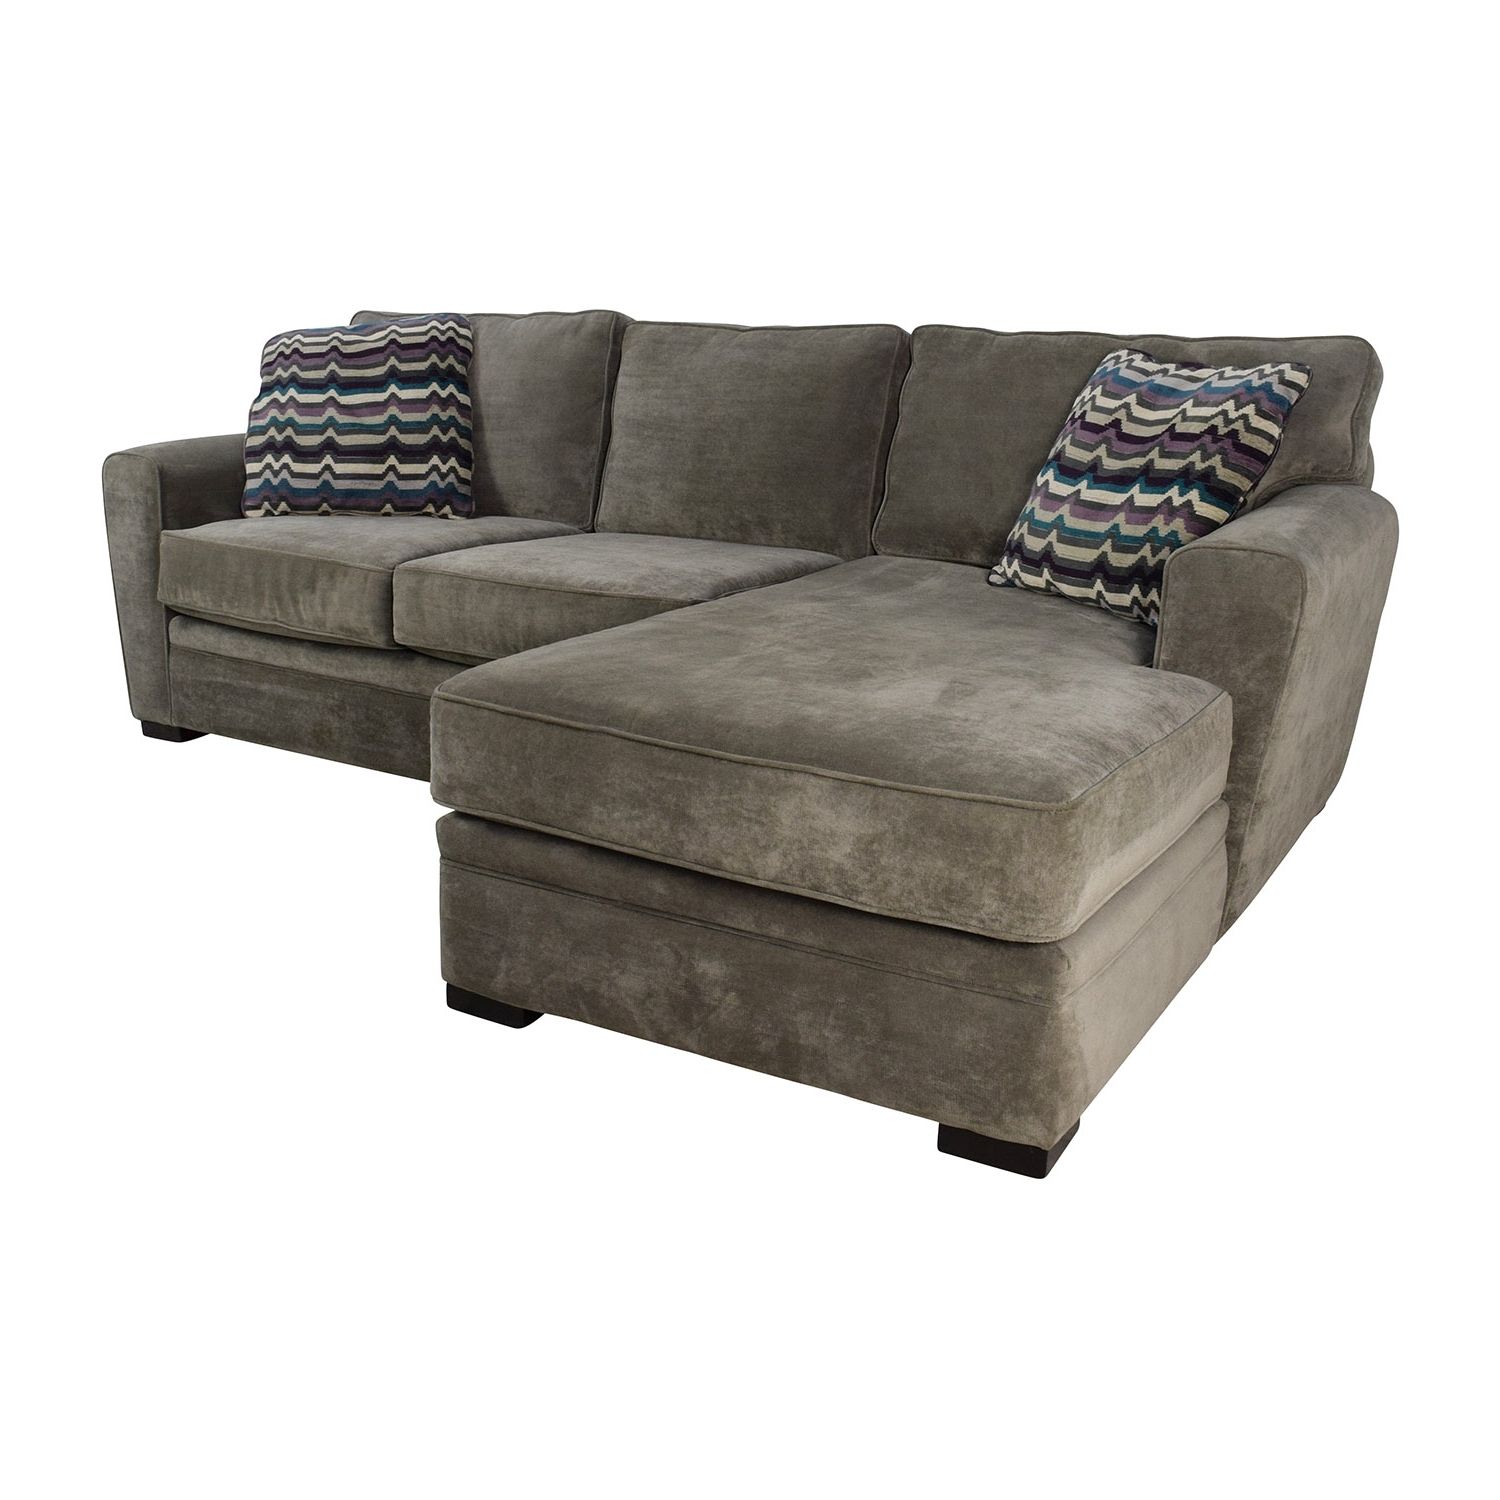 [%52% Off – Raymour & Flanigan Raymour & Flanigan Artemis Ii Inside Best And Newest Raymour And Flanigan Sectional Sofas|raymour And Flanigan Sectional Sofas For Most Up To Date 52% Off – Raymour & Flanigan Raymour & Flanigan Artemis Ii|favorite Raymour And Flanigan Sectional Sofas Pertaining To 52% Off – Raymour & Flanigan Raymour & Flanigan Artemis Ii|most Recent 52% Off – Raymour & Flanigan Raymour & Flanigan Artemis Ii Pertaining To Raymour And Flanigan Sectional Sofas%] (Photo 1 of 15)